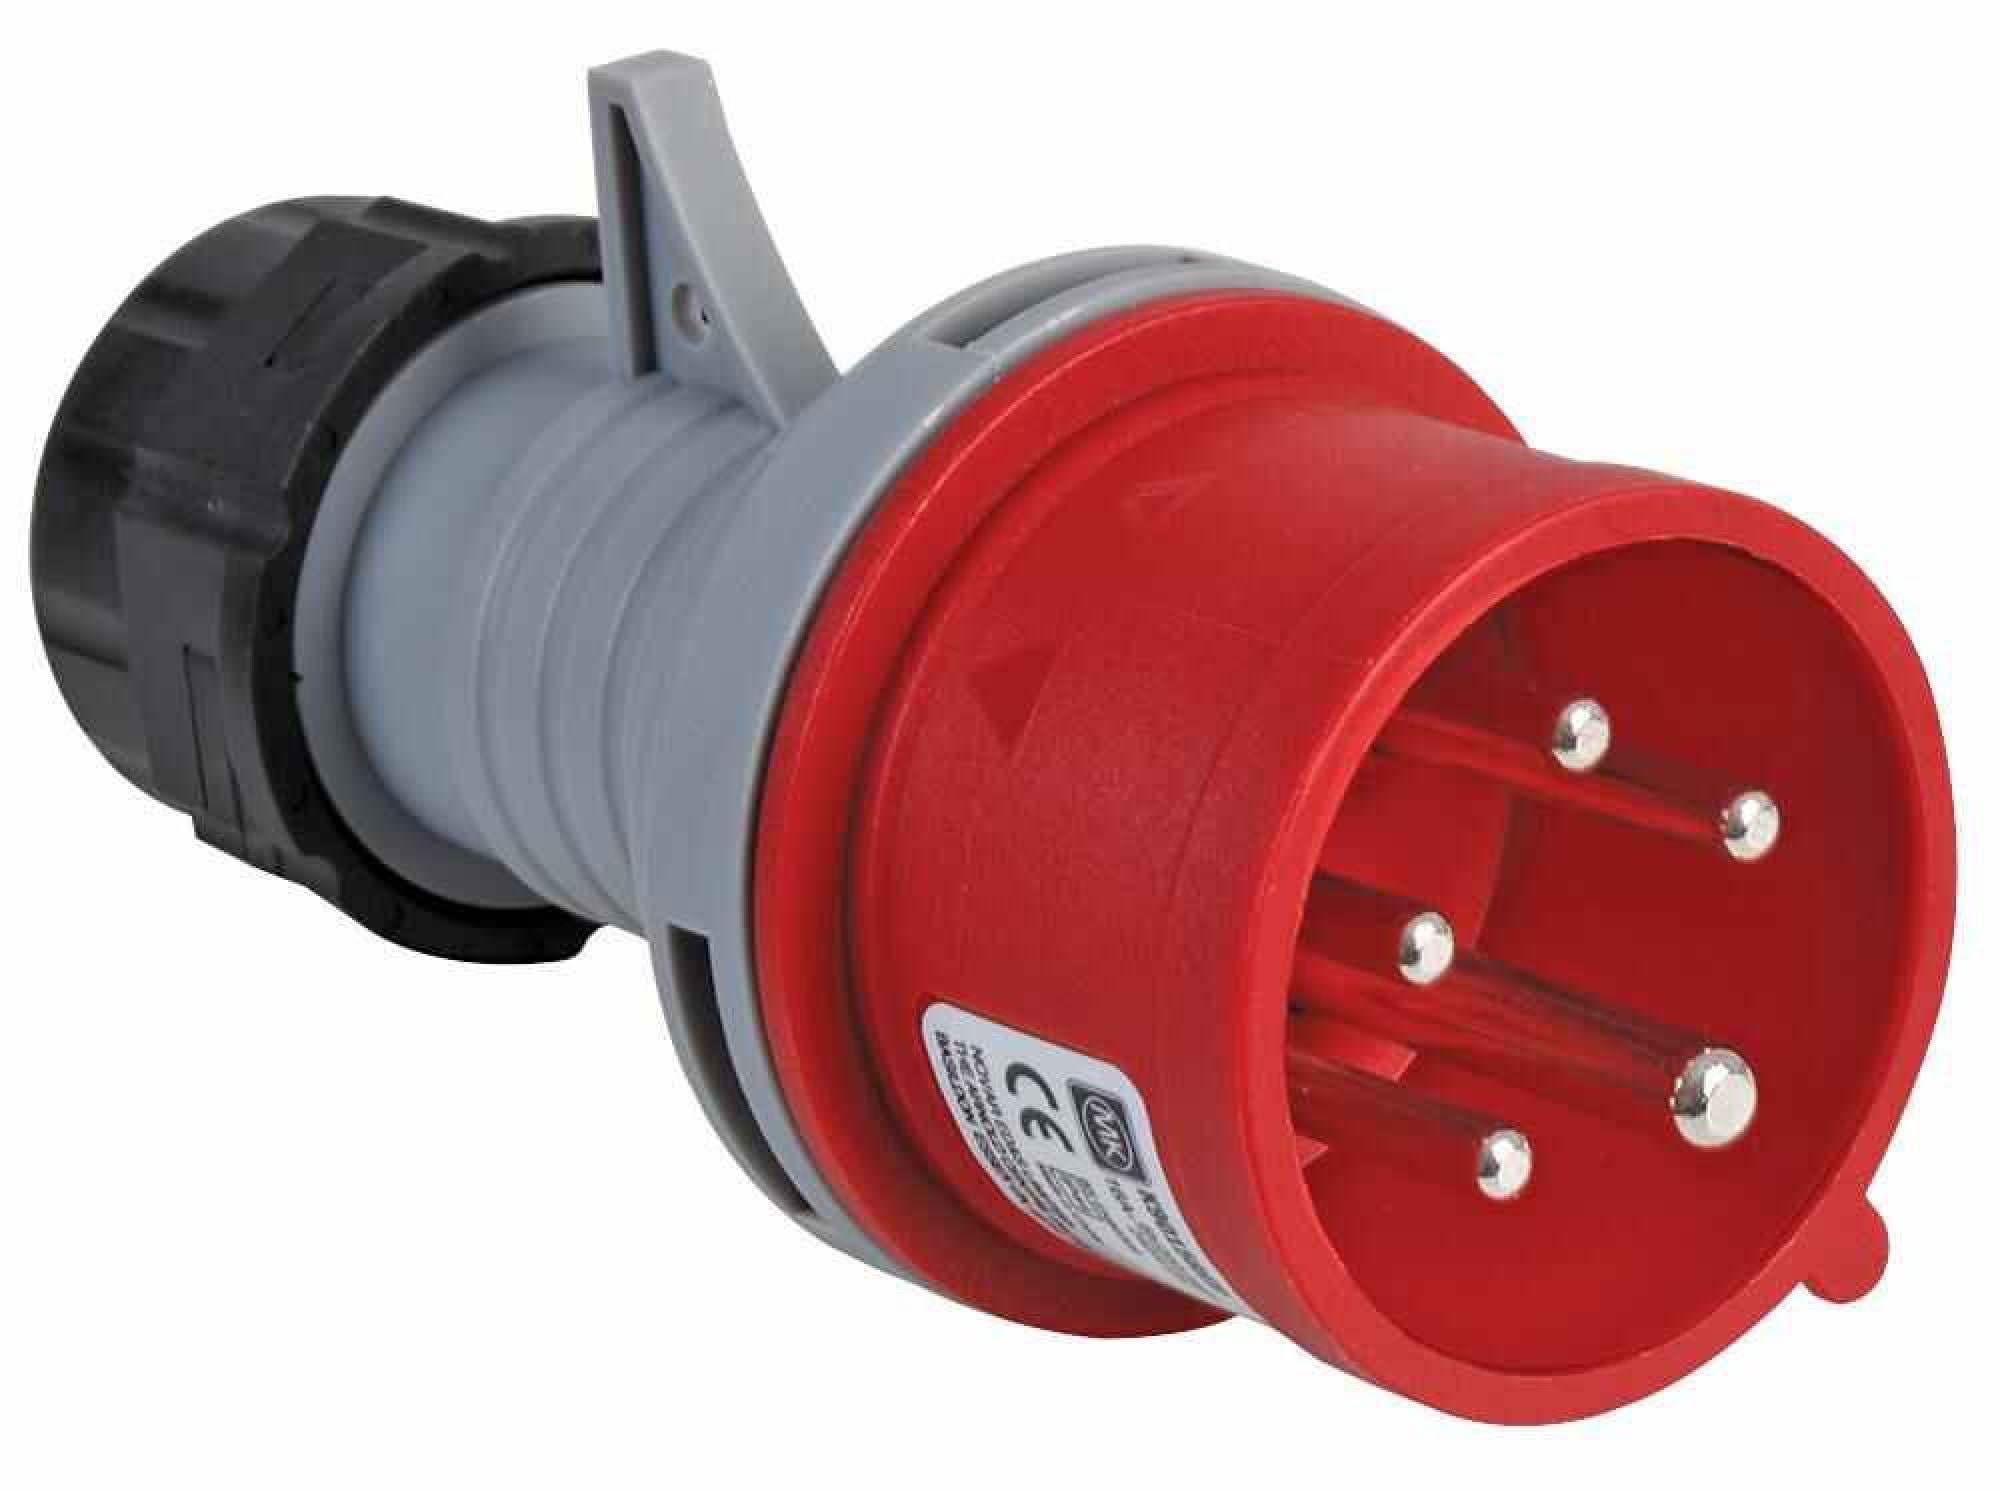 MK - 16A, 415V, Cable Mount CEE Plug, 3P+N+E, Red, IP44